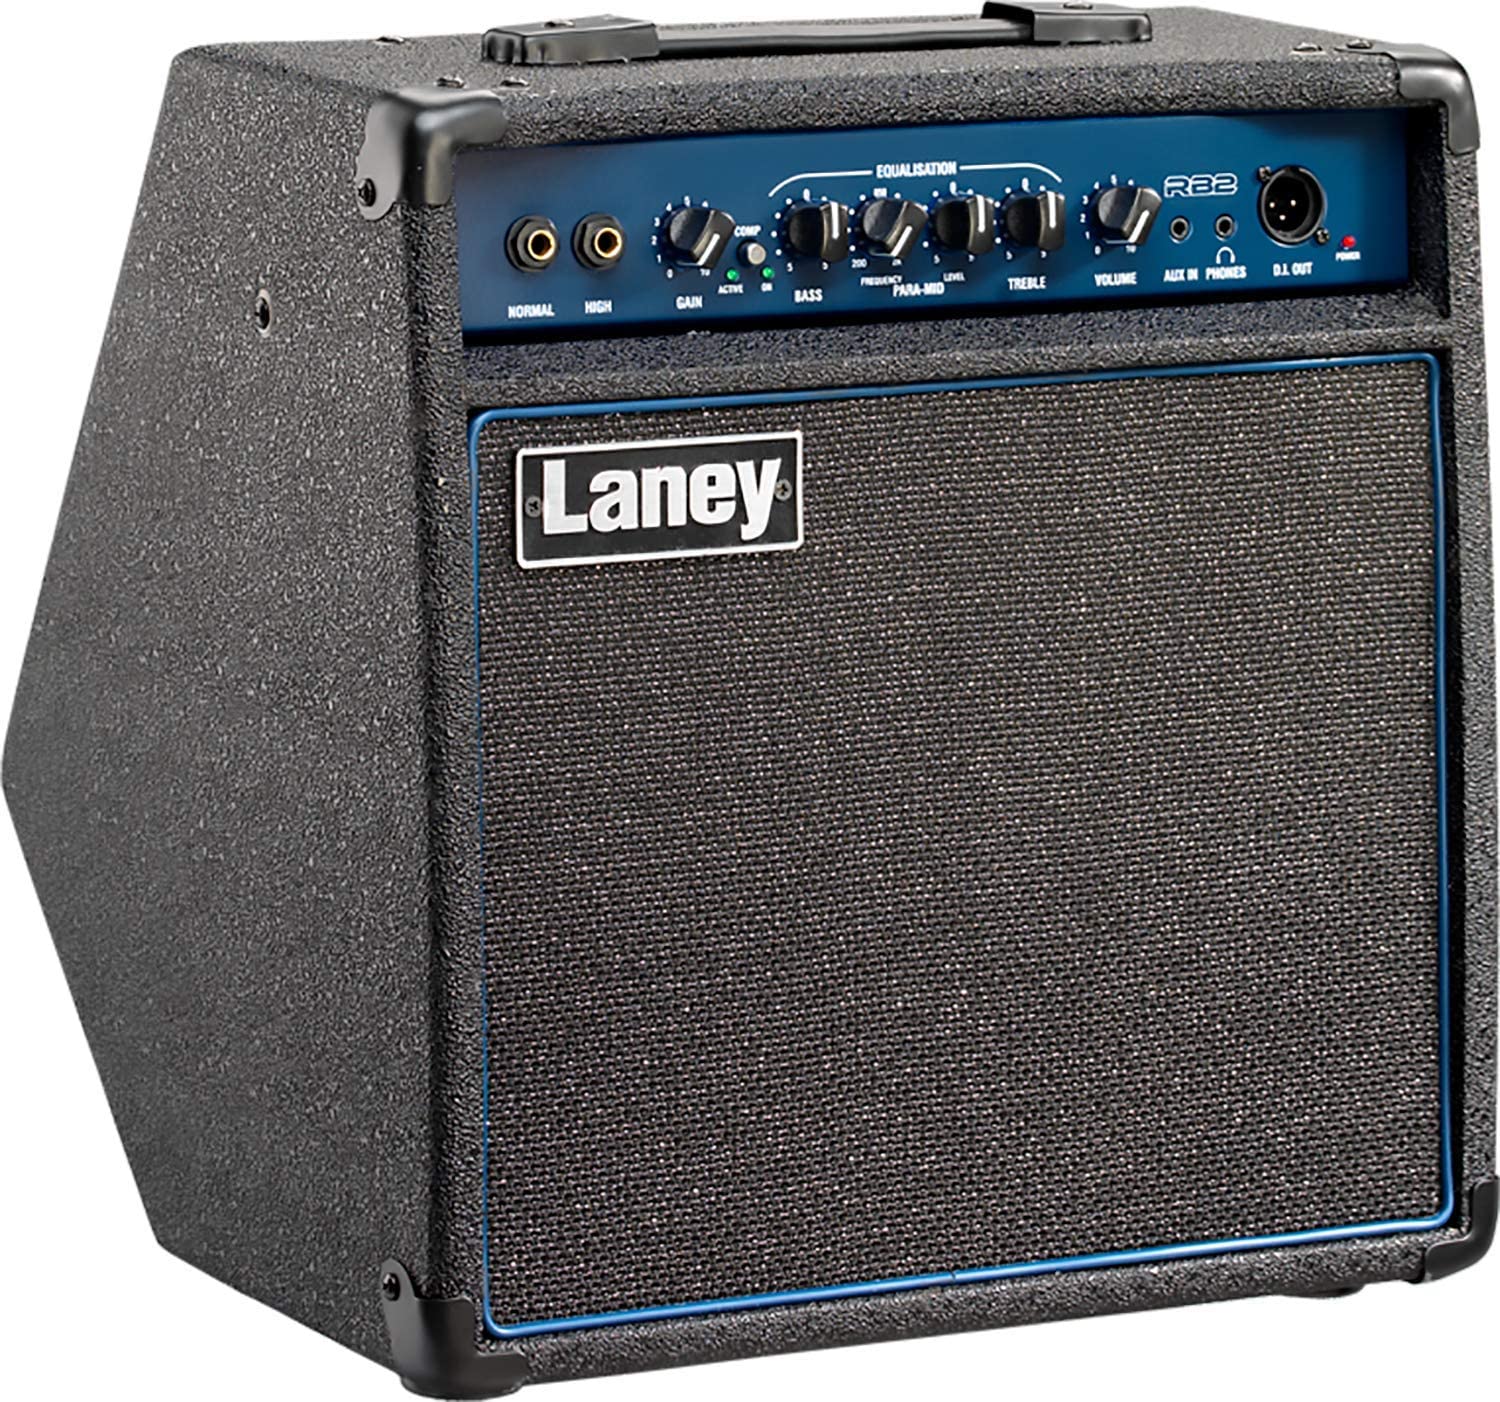 Best Sub And Amp Combo Best Buy, Laney RB2 30-Watts Bass Combo Amplifier